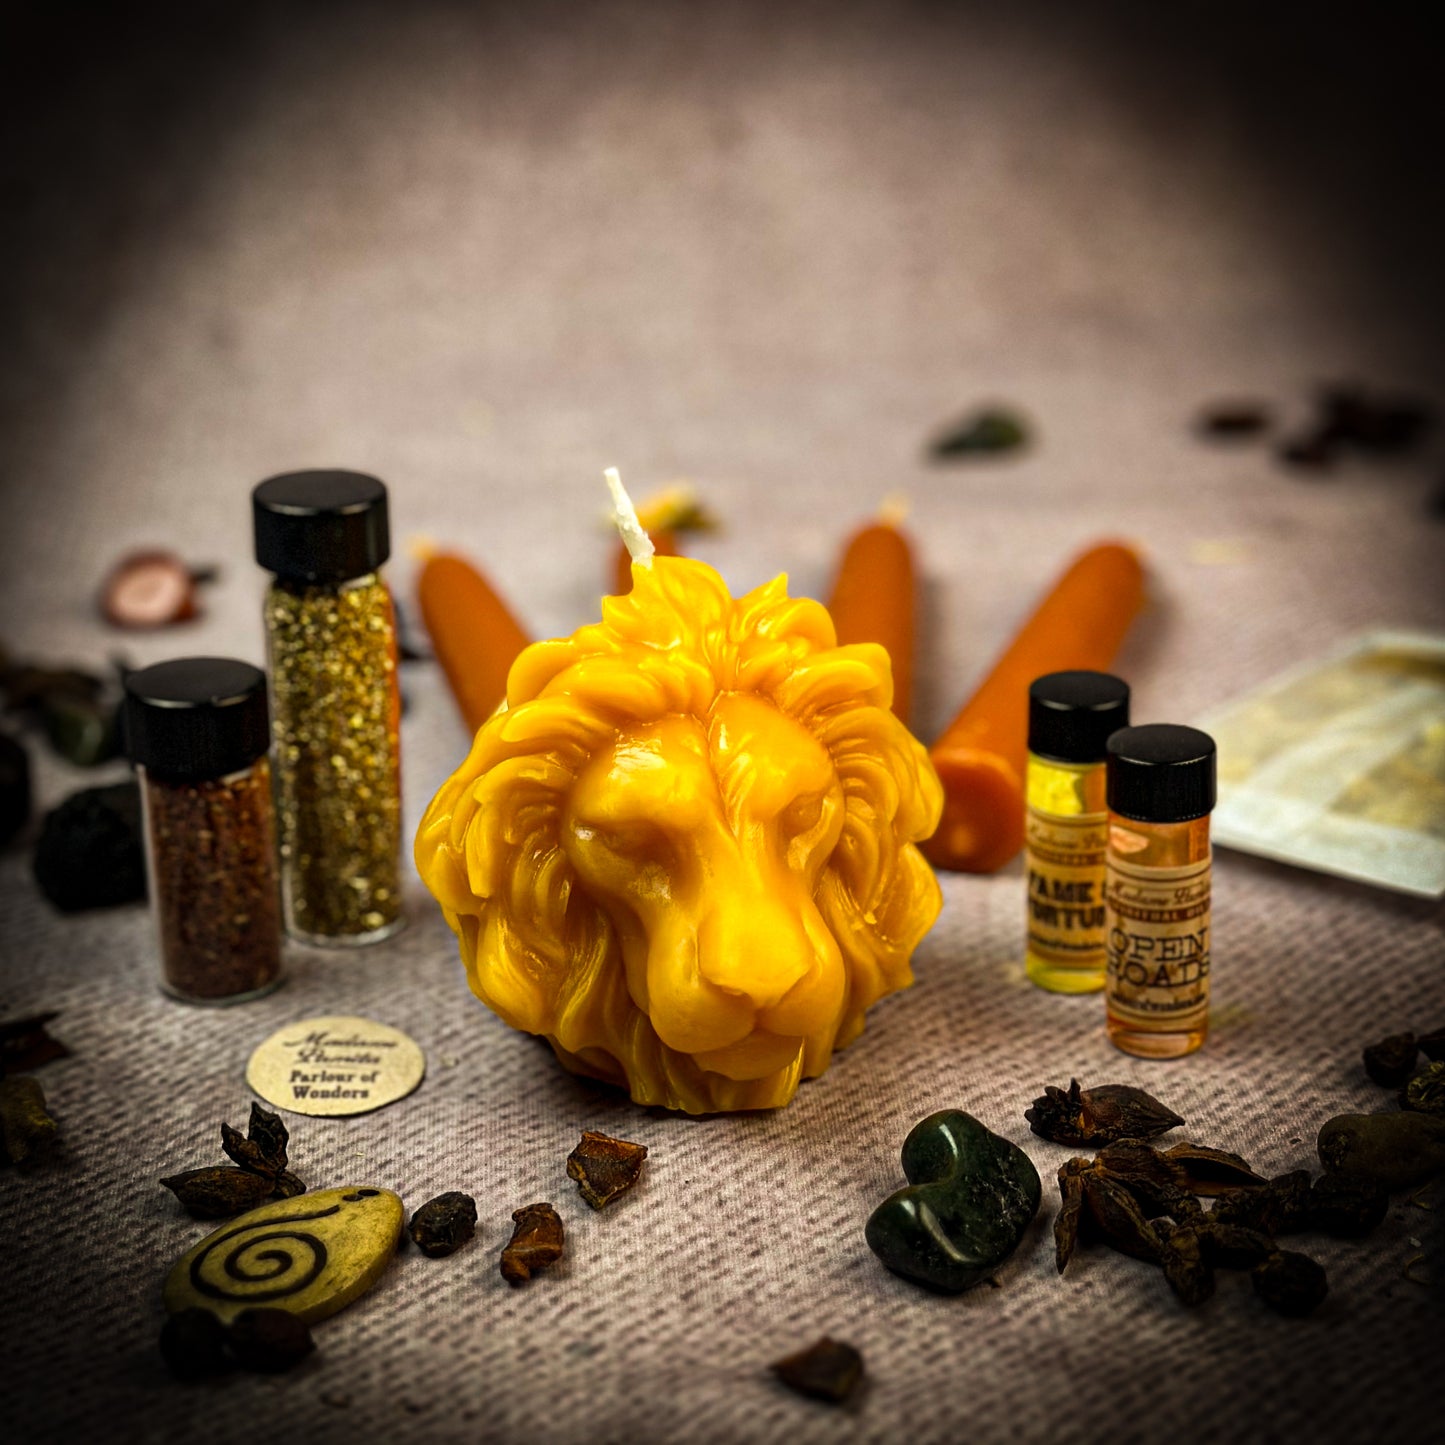 Limited Edition Lion's Gate Portal Candle Spell Kit